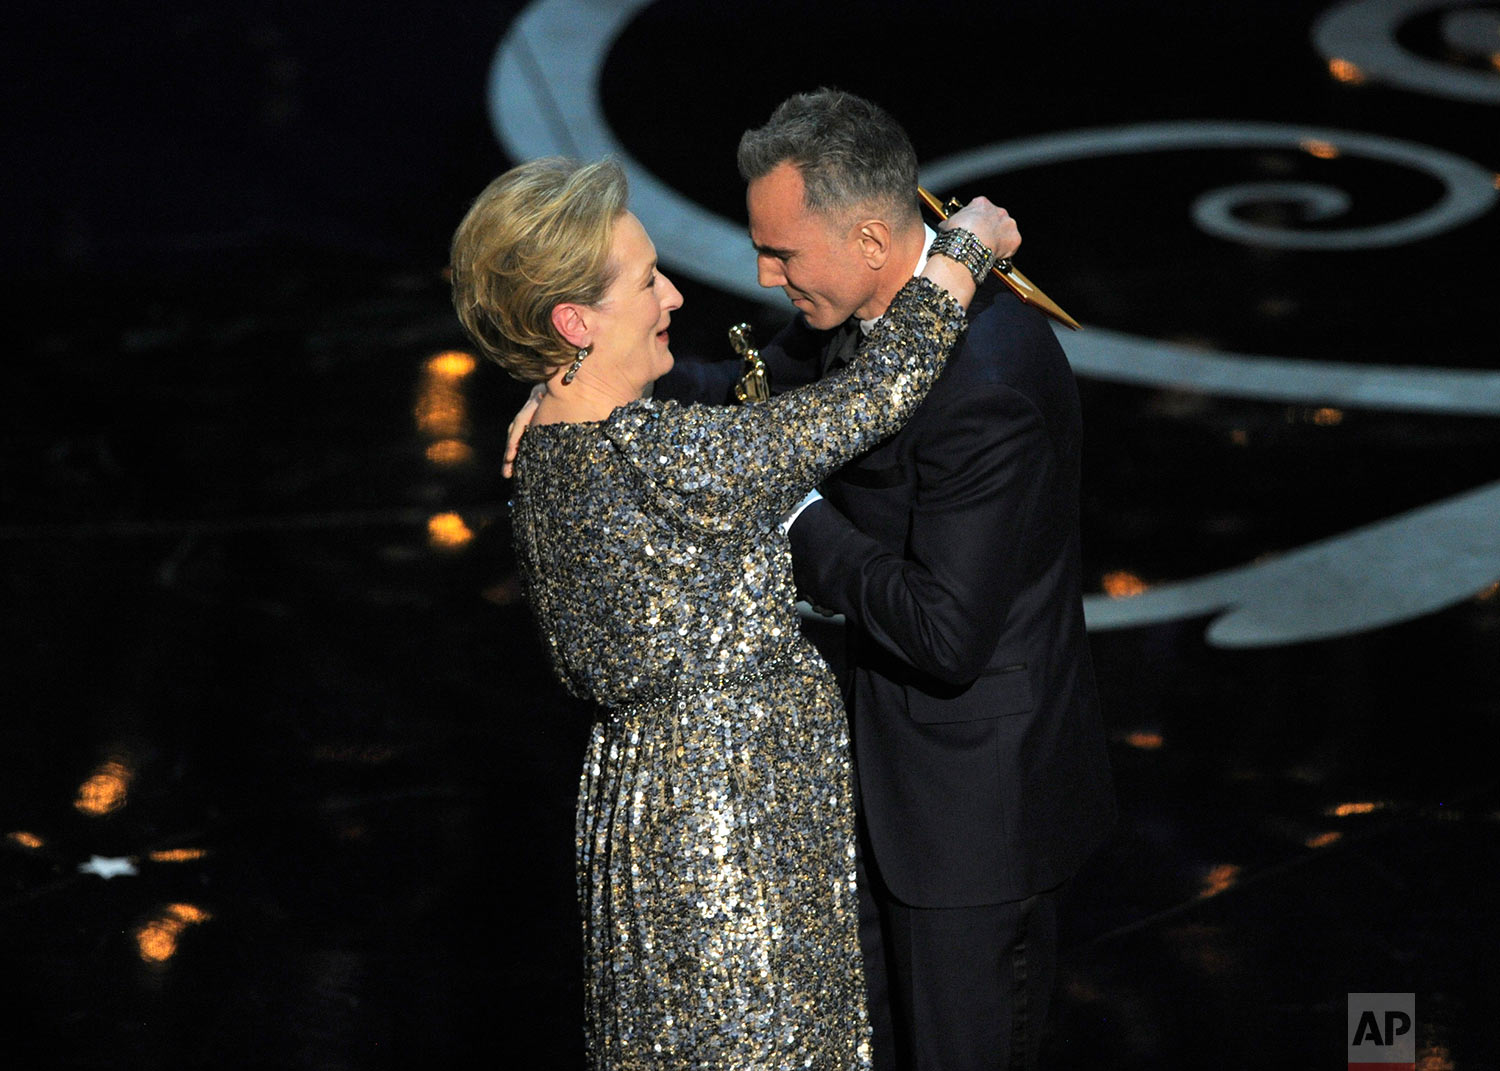  Meryl Streep, left, presents the award for best actor in a leading role to Daniel Day-Lewis for "Lincoln" during the Oscars at the Dolby Theatre on Sunday Feb. 24, 2013, in Los Angeles.  (Photo by Chris Pizzello/Invision/AP) 